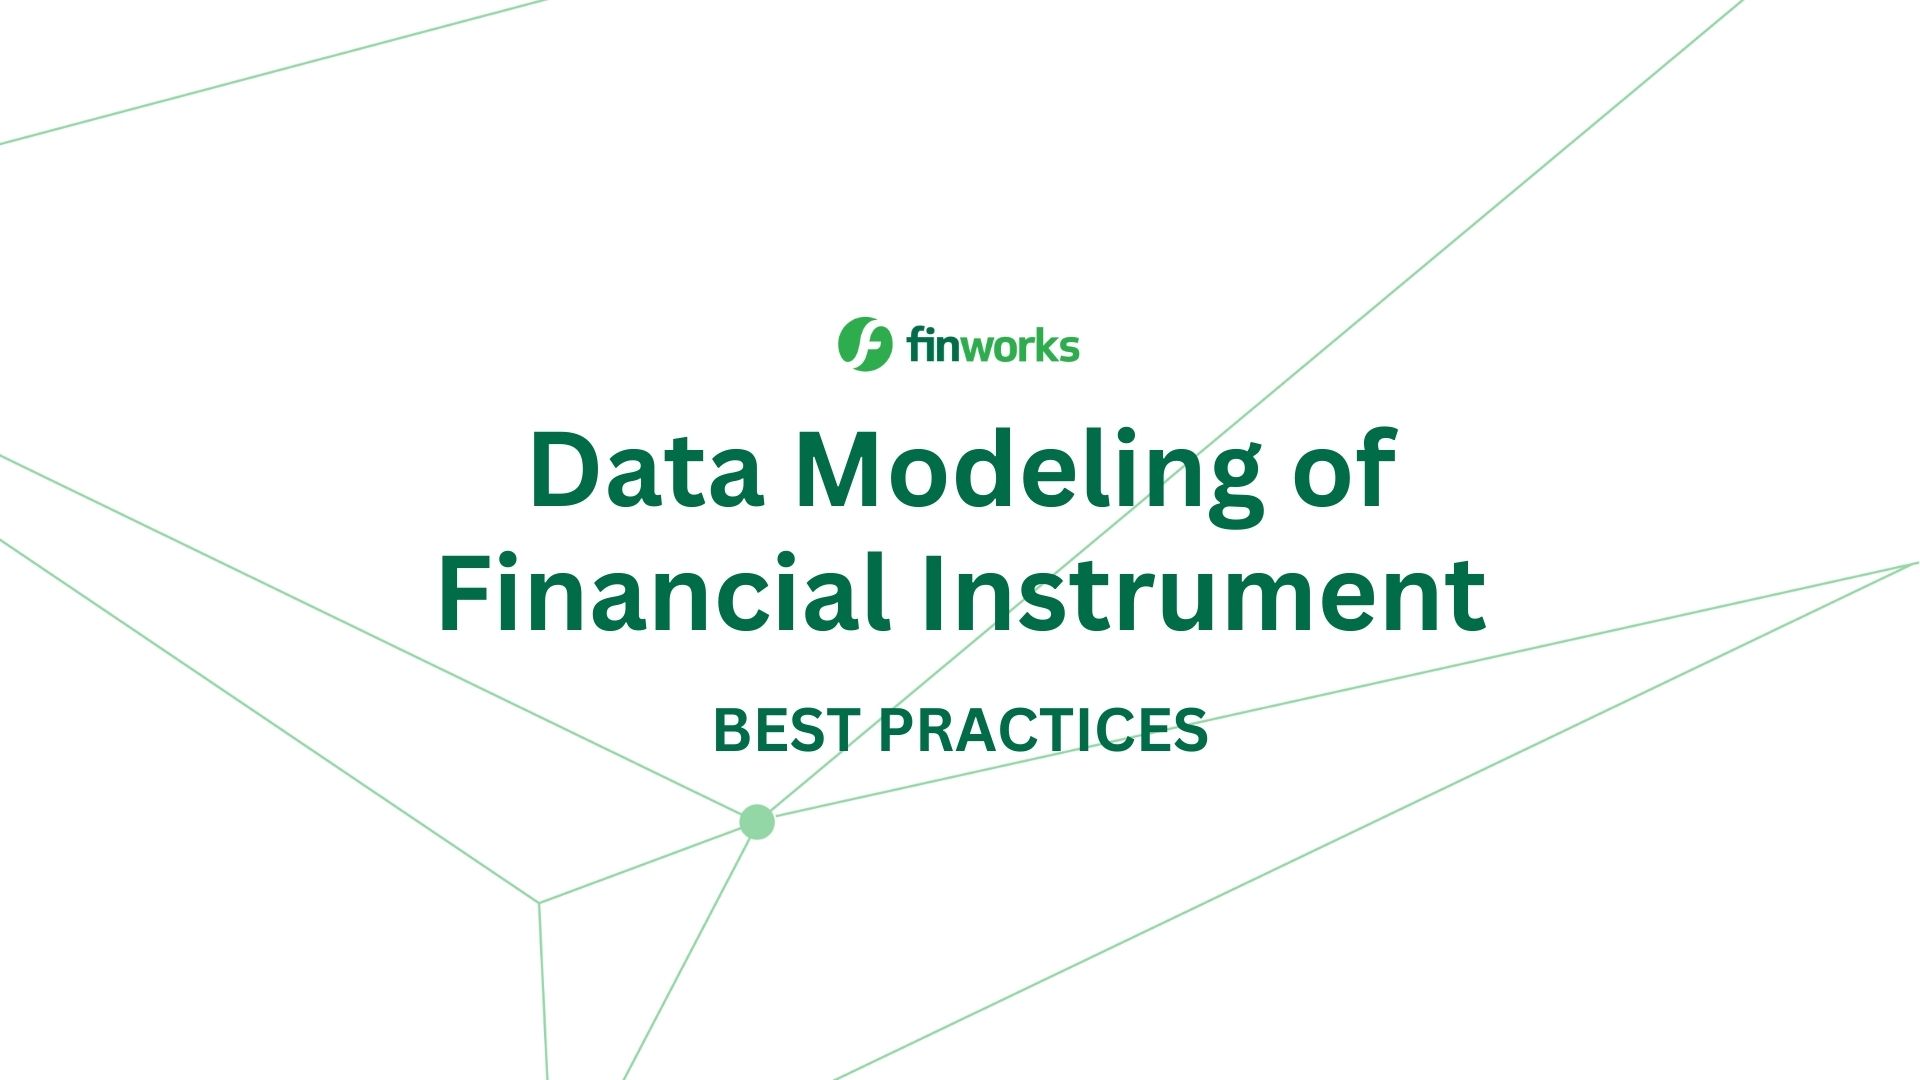 Data modelling of Financial Instruments. Best Practices.